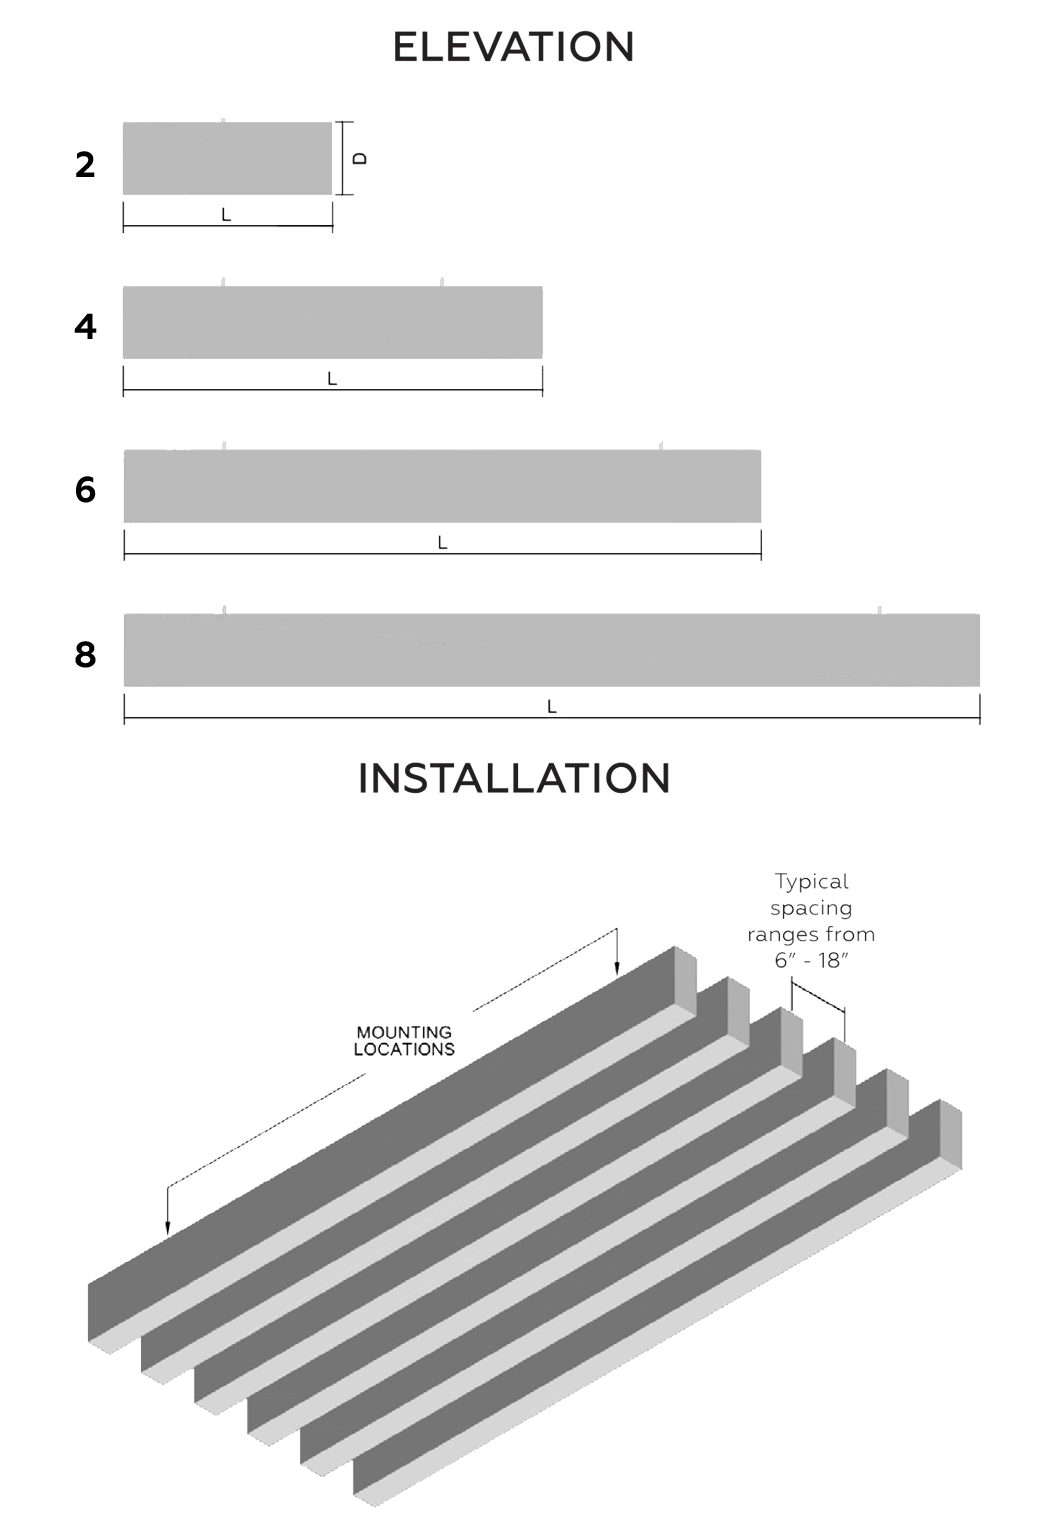 Joist-Elevation-and-Installation-diagram copy